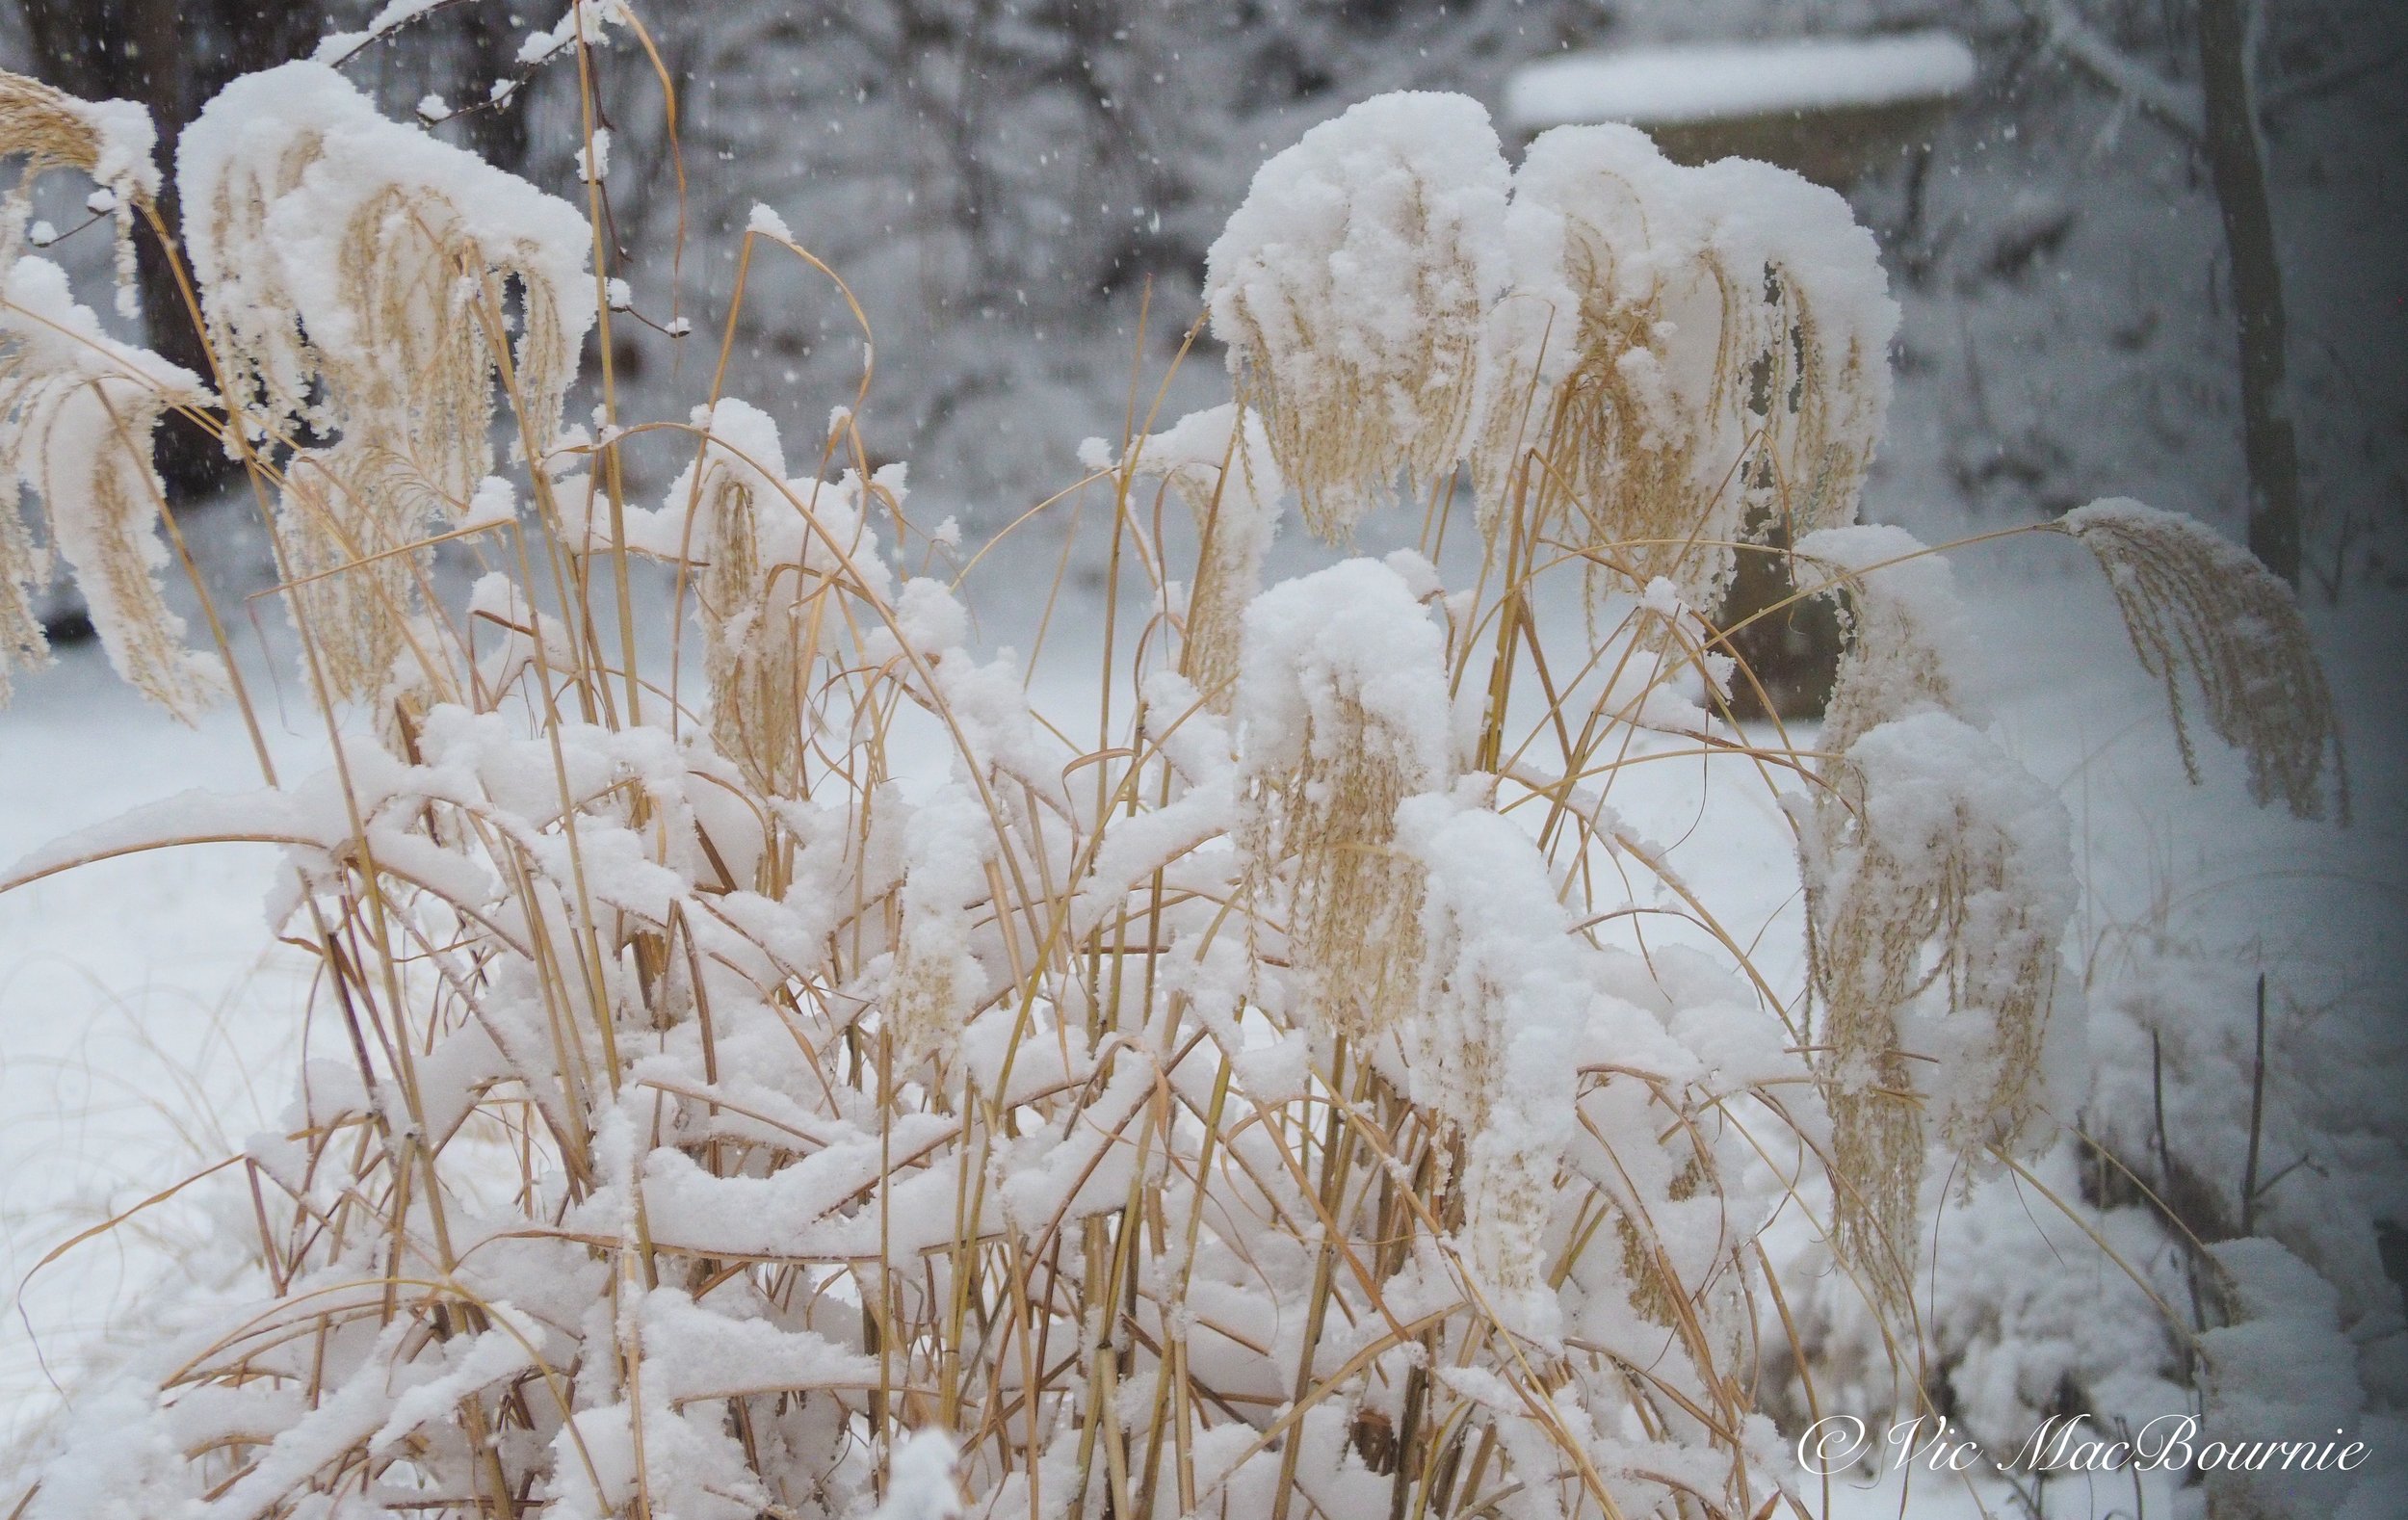 Miscanthus after an early snowfall.